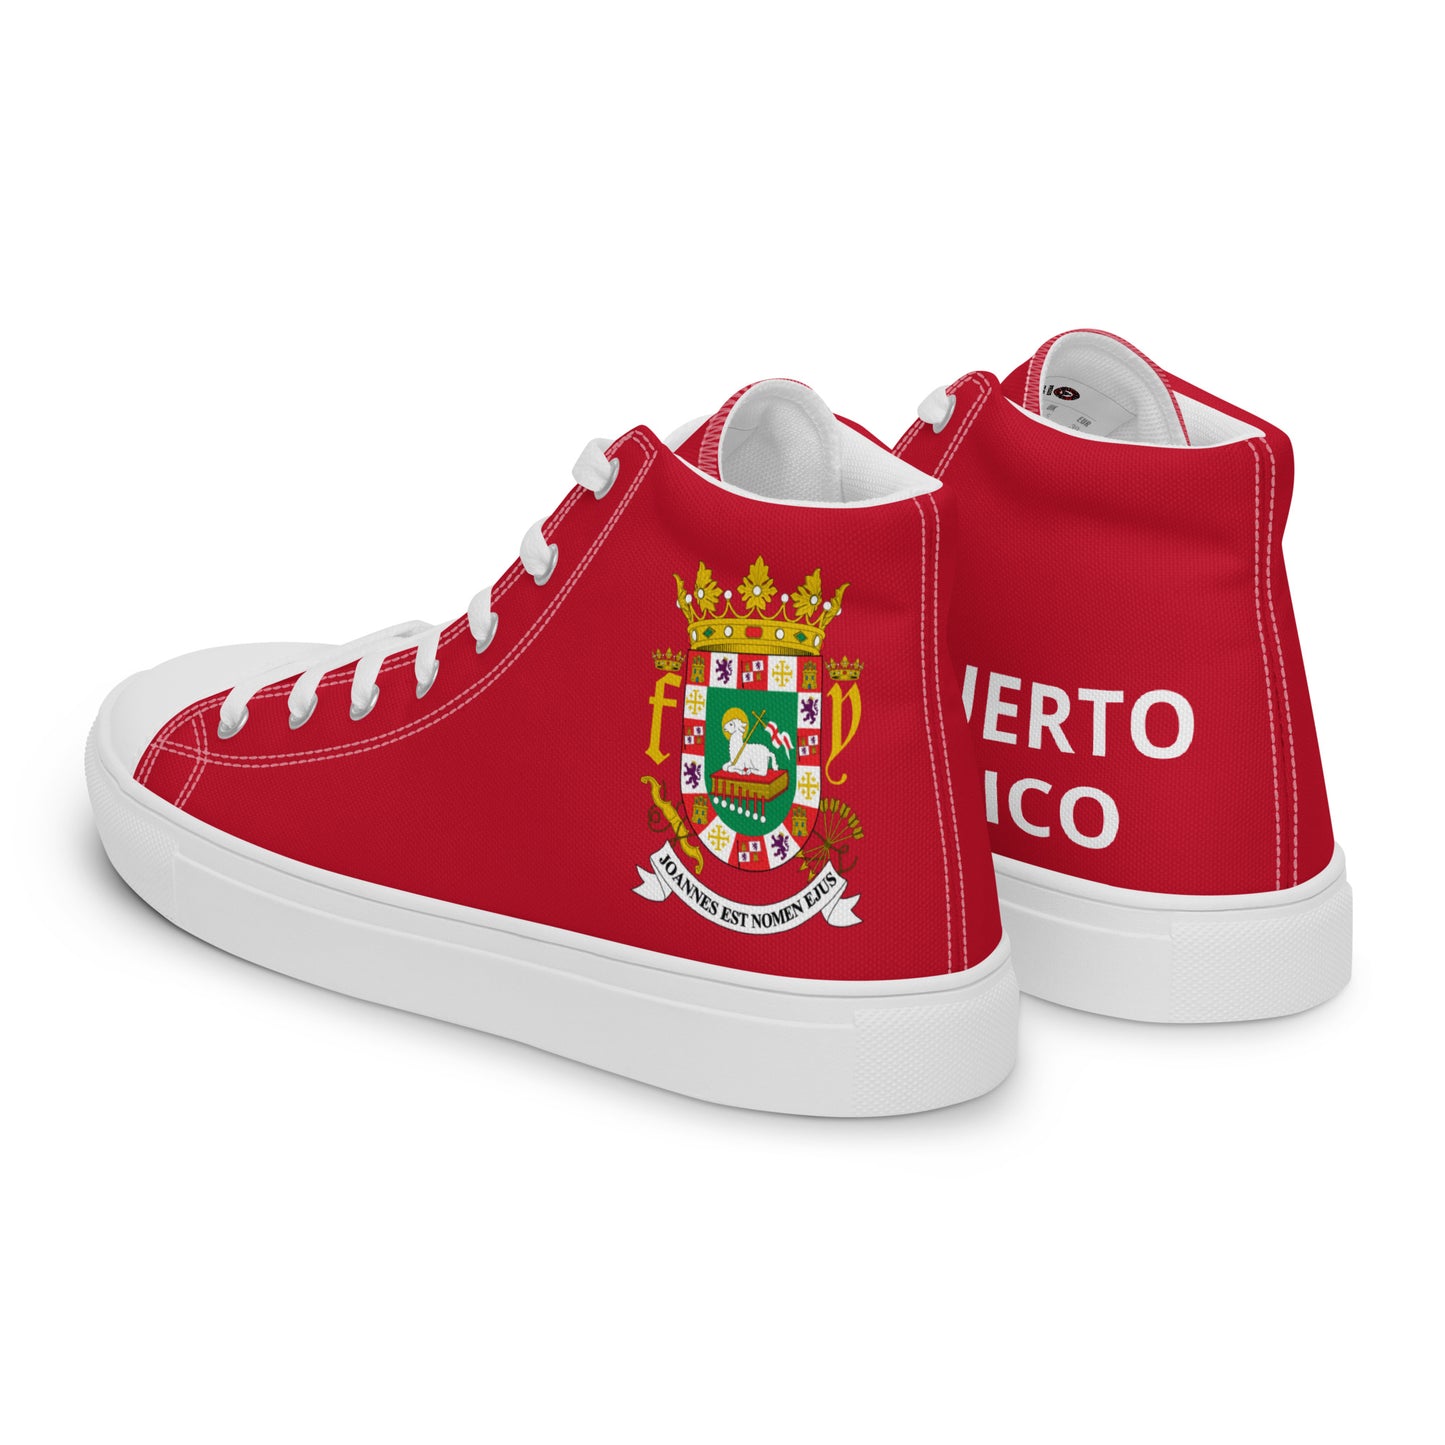 Puerto Rico - Men - Red - High top shoes